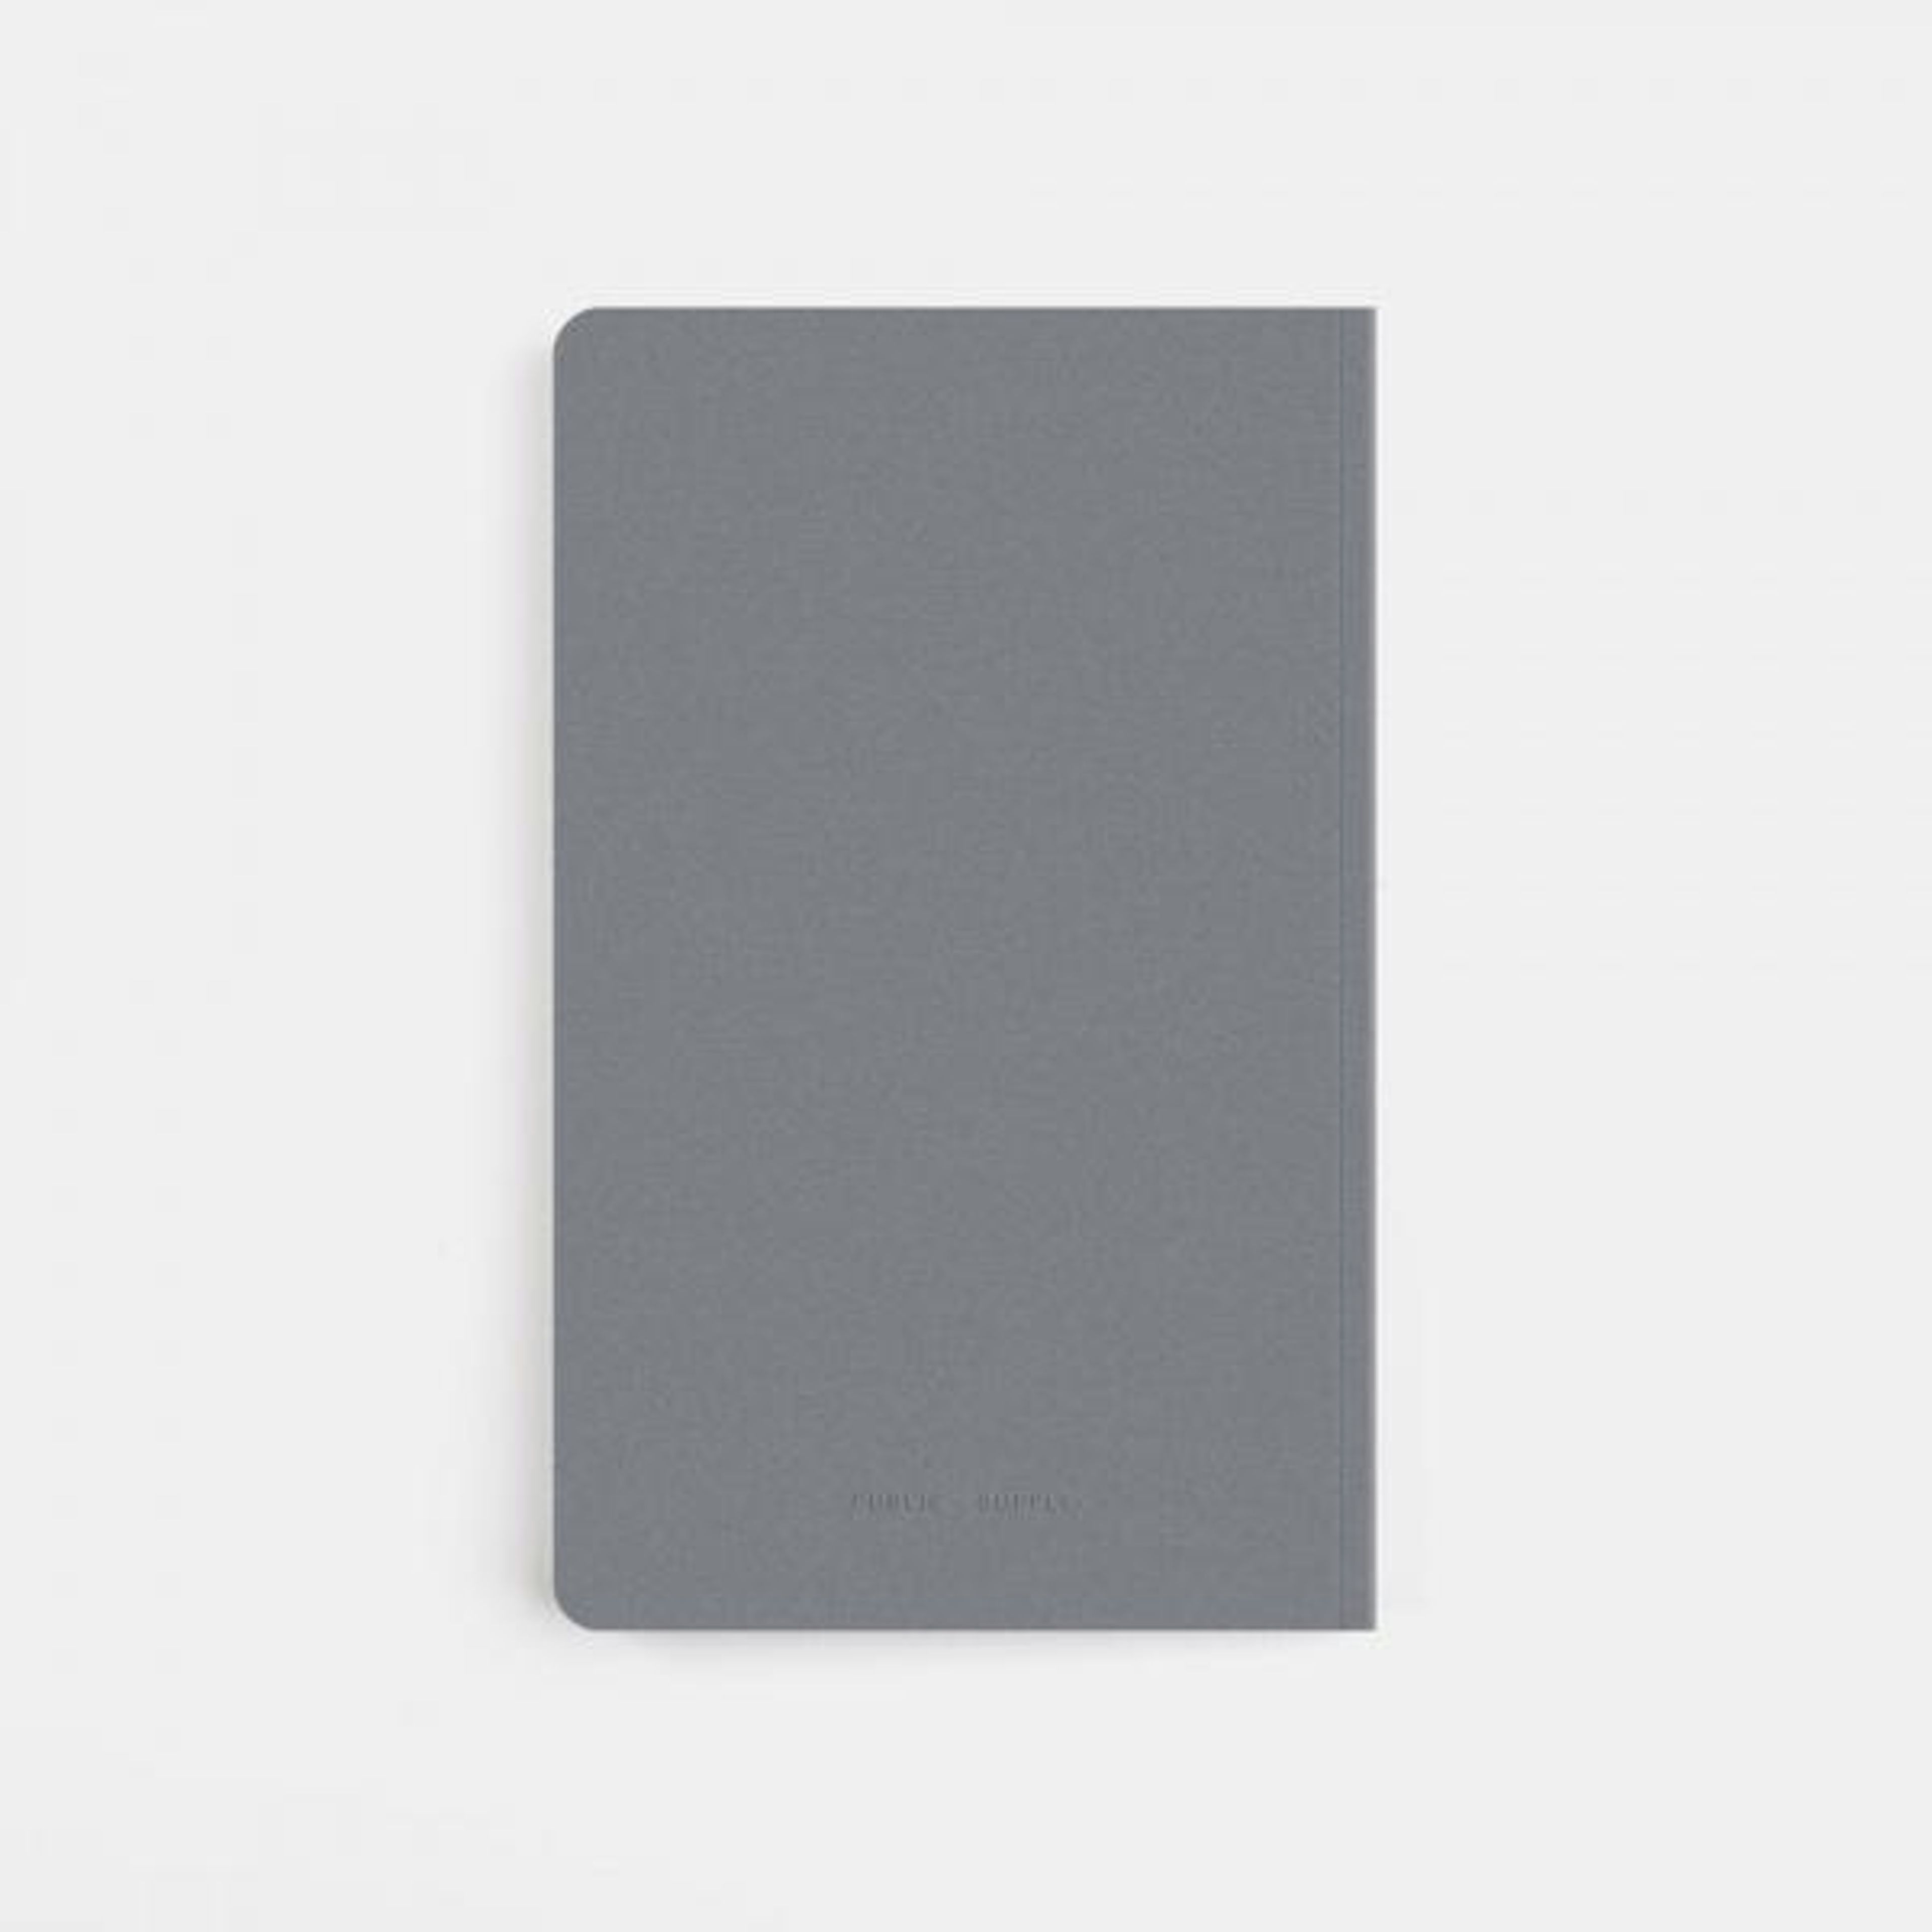 5x8" - Soft Cover Notebook - Embossed - Steel